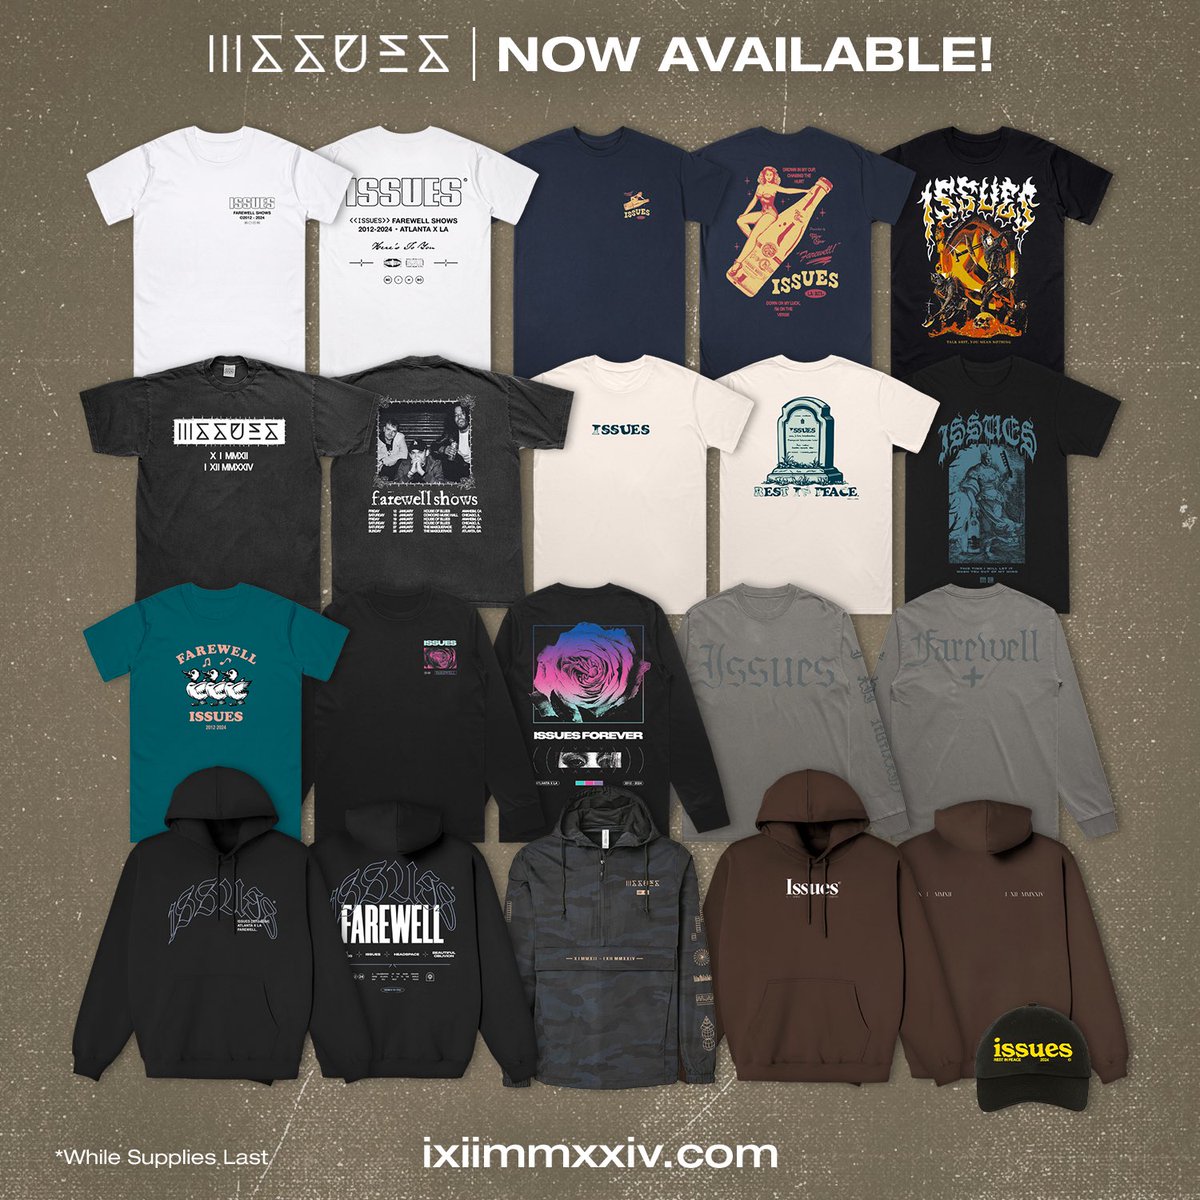 Due to an overwhelming demand the Tour Farewell Merchandise collection is available for purchase from our online store *while stock lasts* Once they’re gone, they’re gone!! Don’t miss out ixiimmxxiv.com 🖤